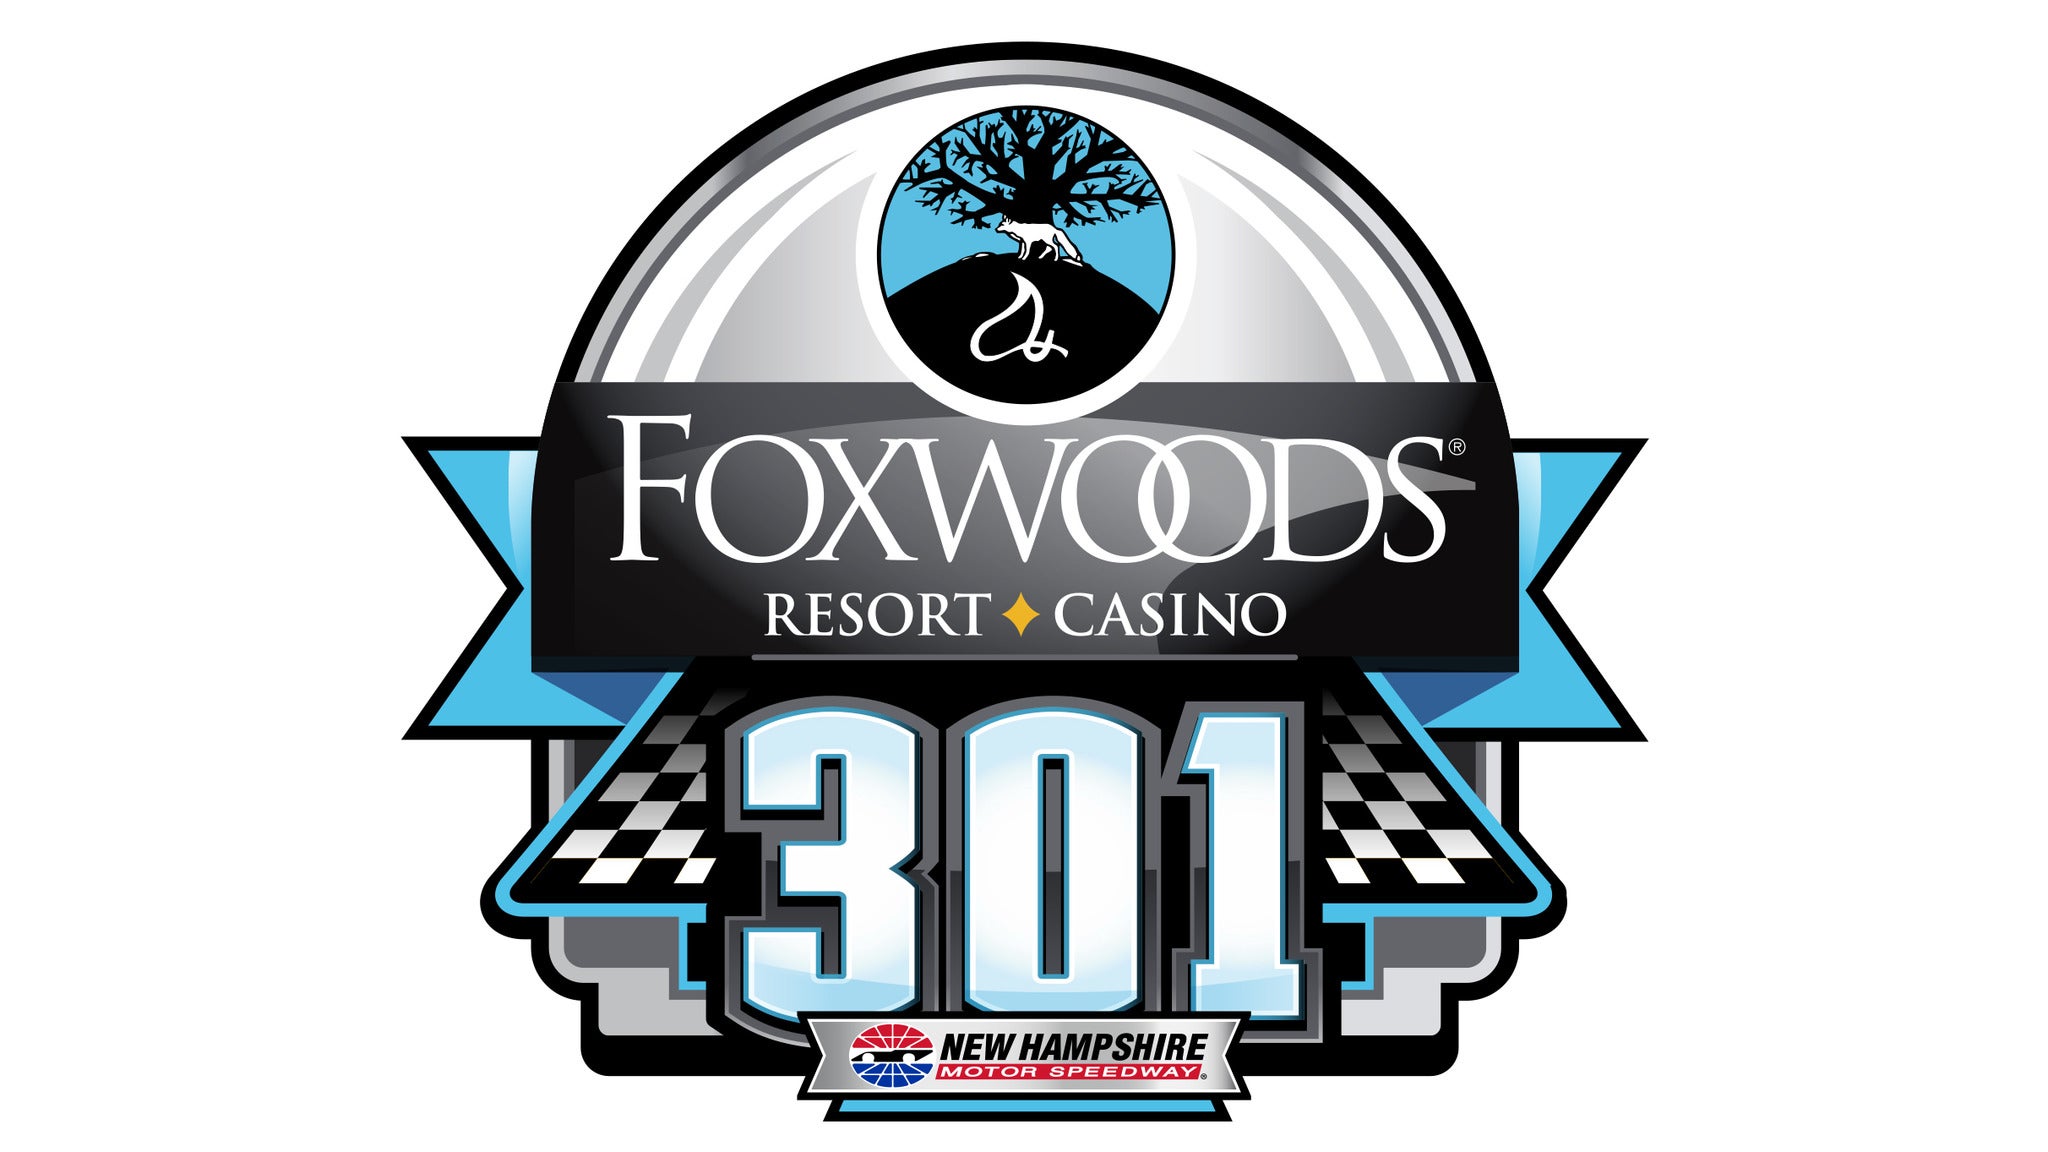 cheap tickets to foxwoodct casino